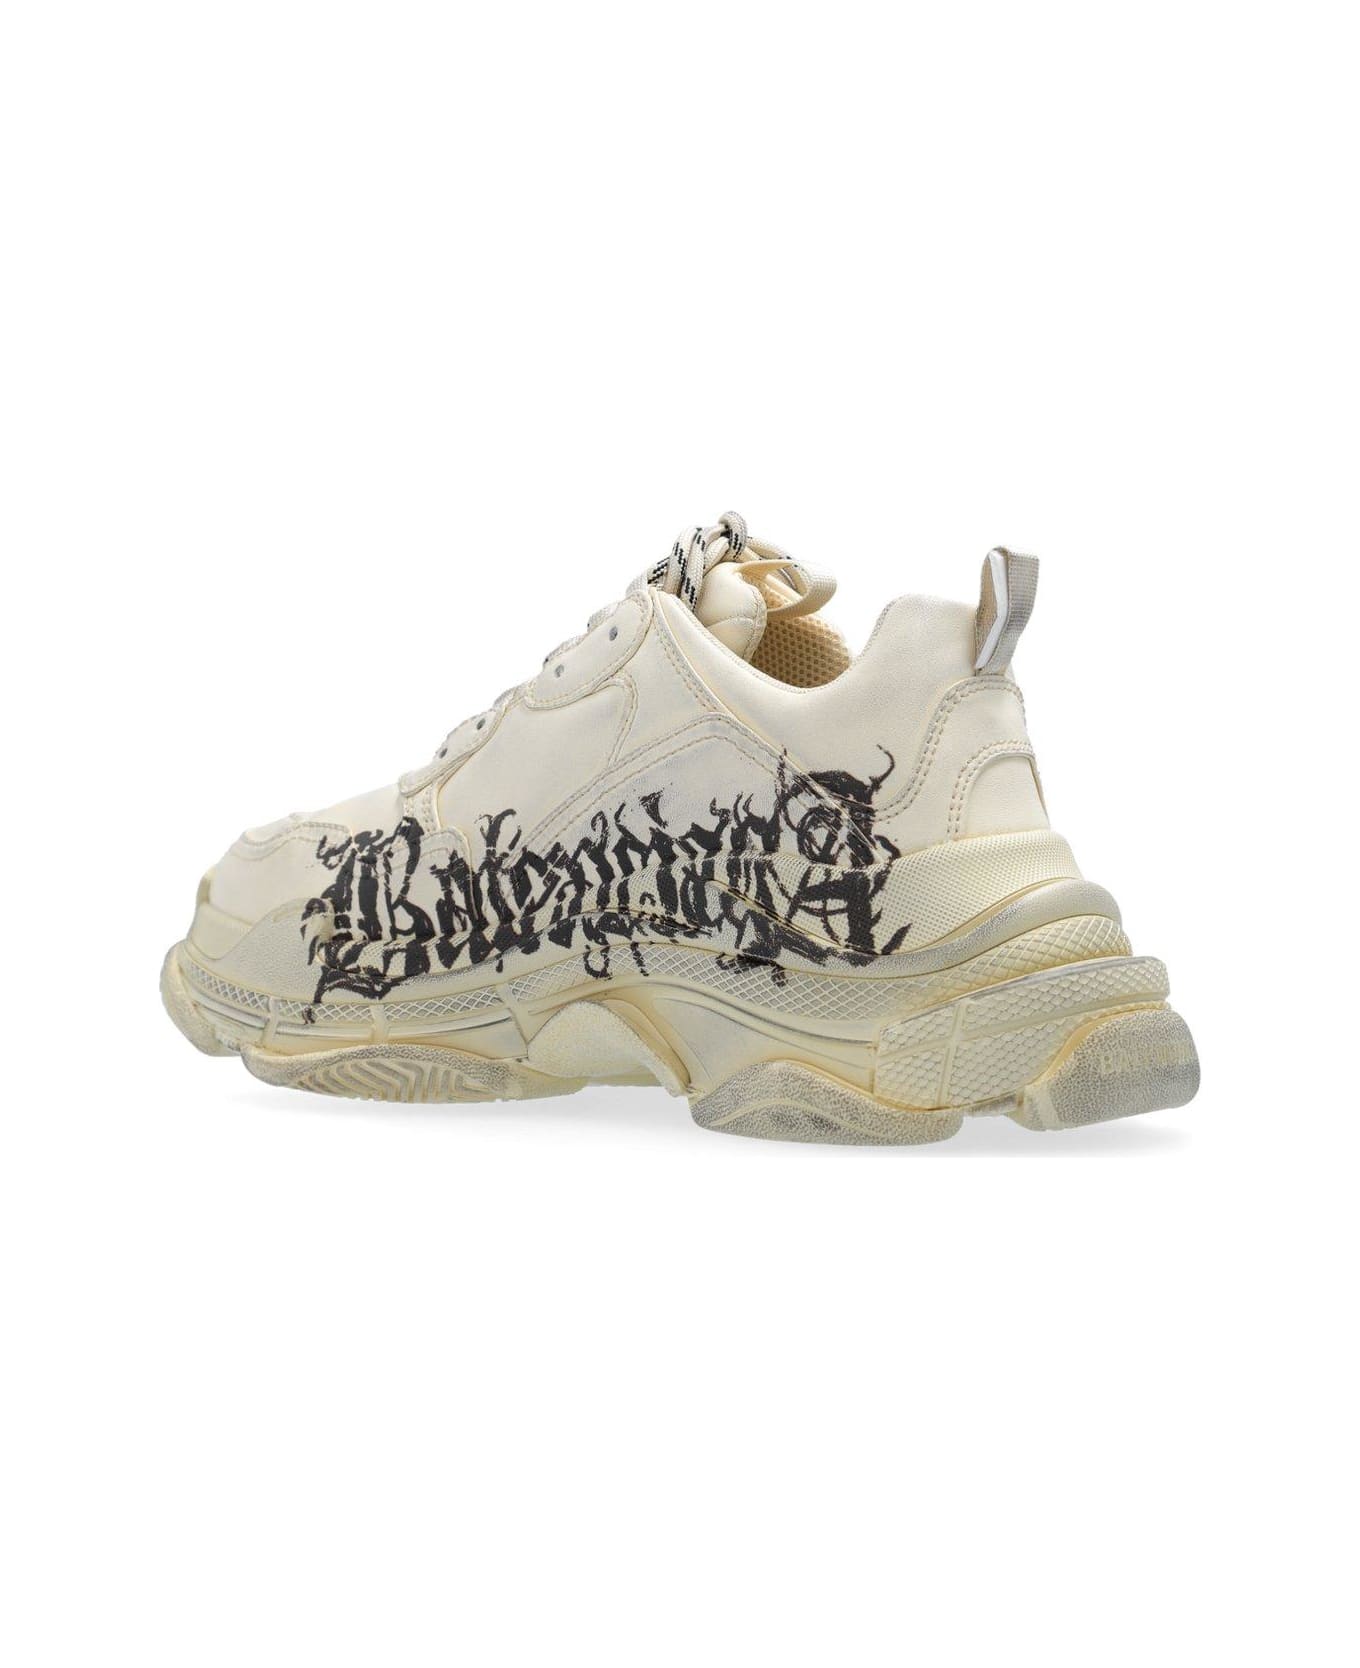 Balenciaga Triples Lace-up Sneakers - White スニーカー